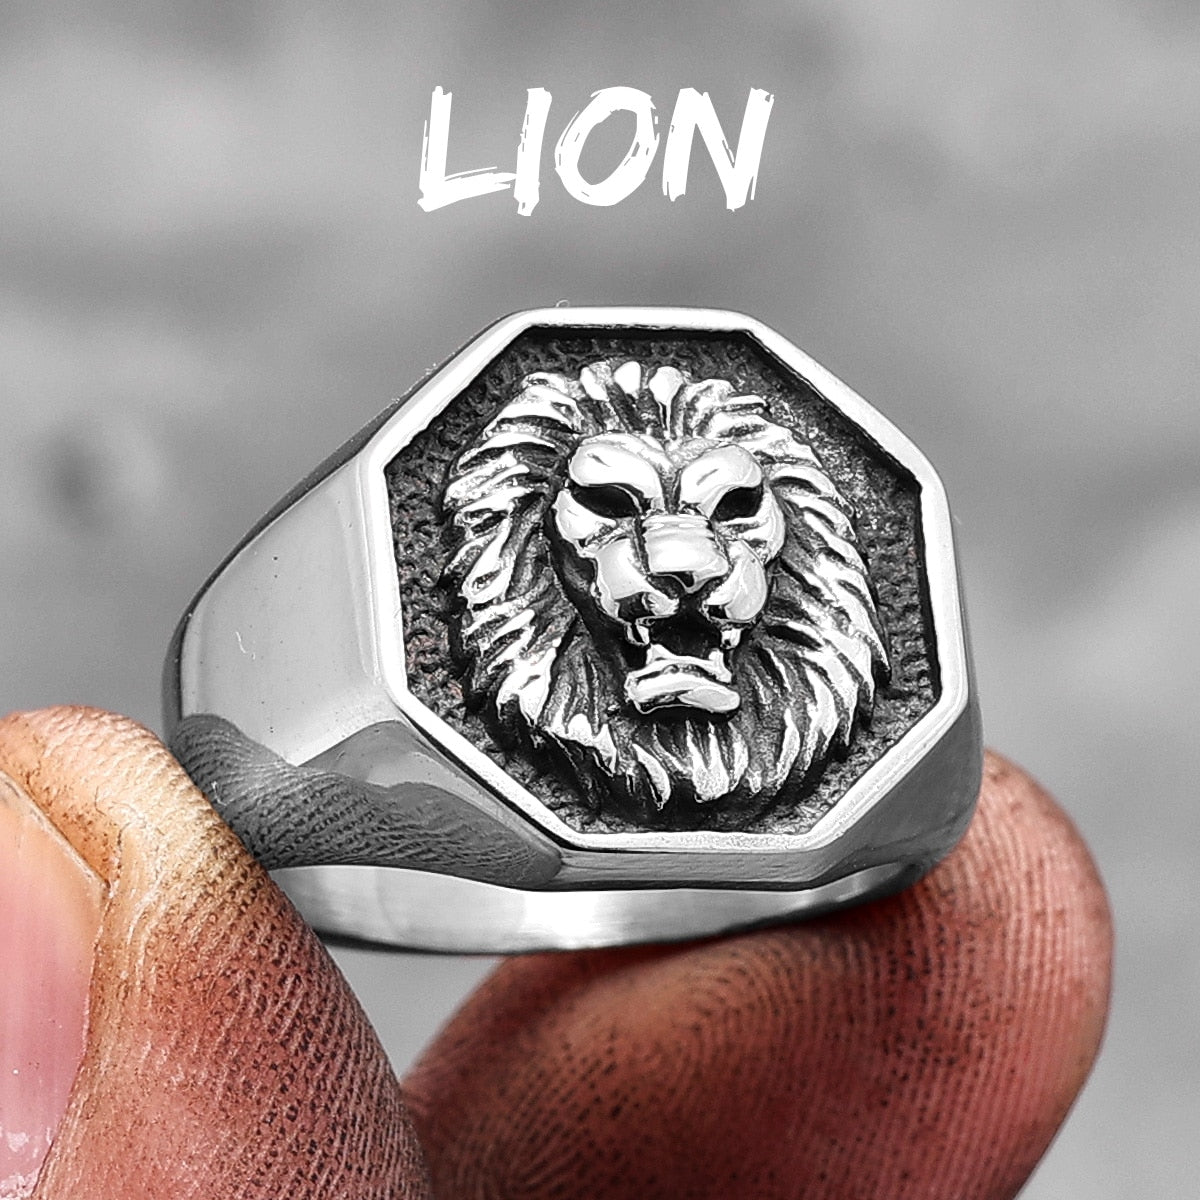 Lion King Animal Stainless Steel Mens Women's Rings Punk Trendy Unique for Couple Male Biker Jewelry Creativity Gift R760-Lion-Silver